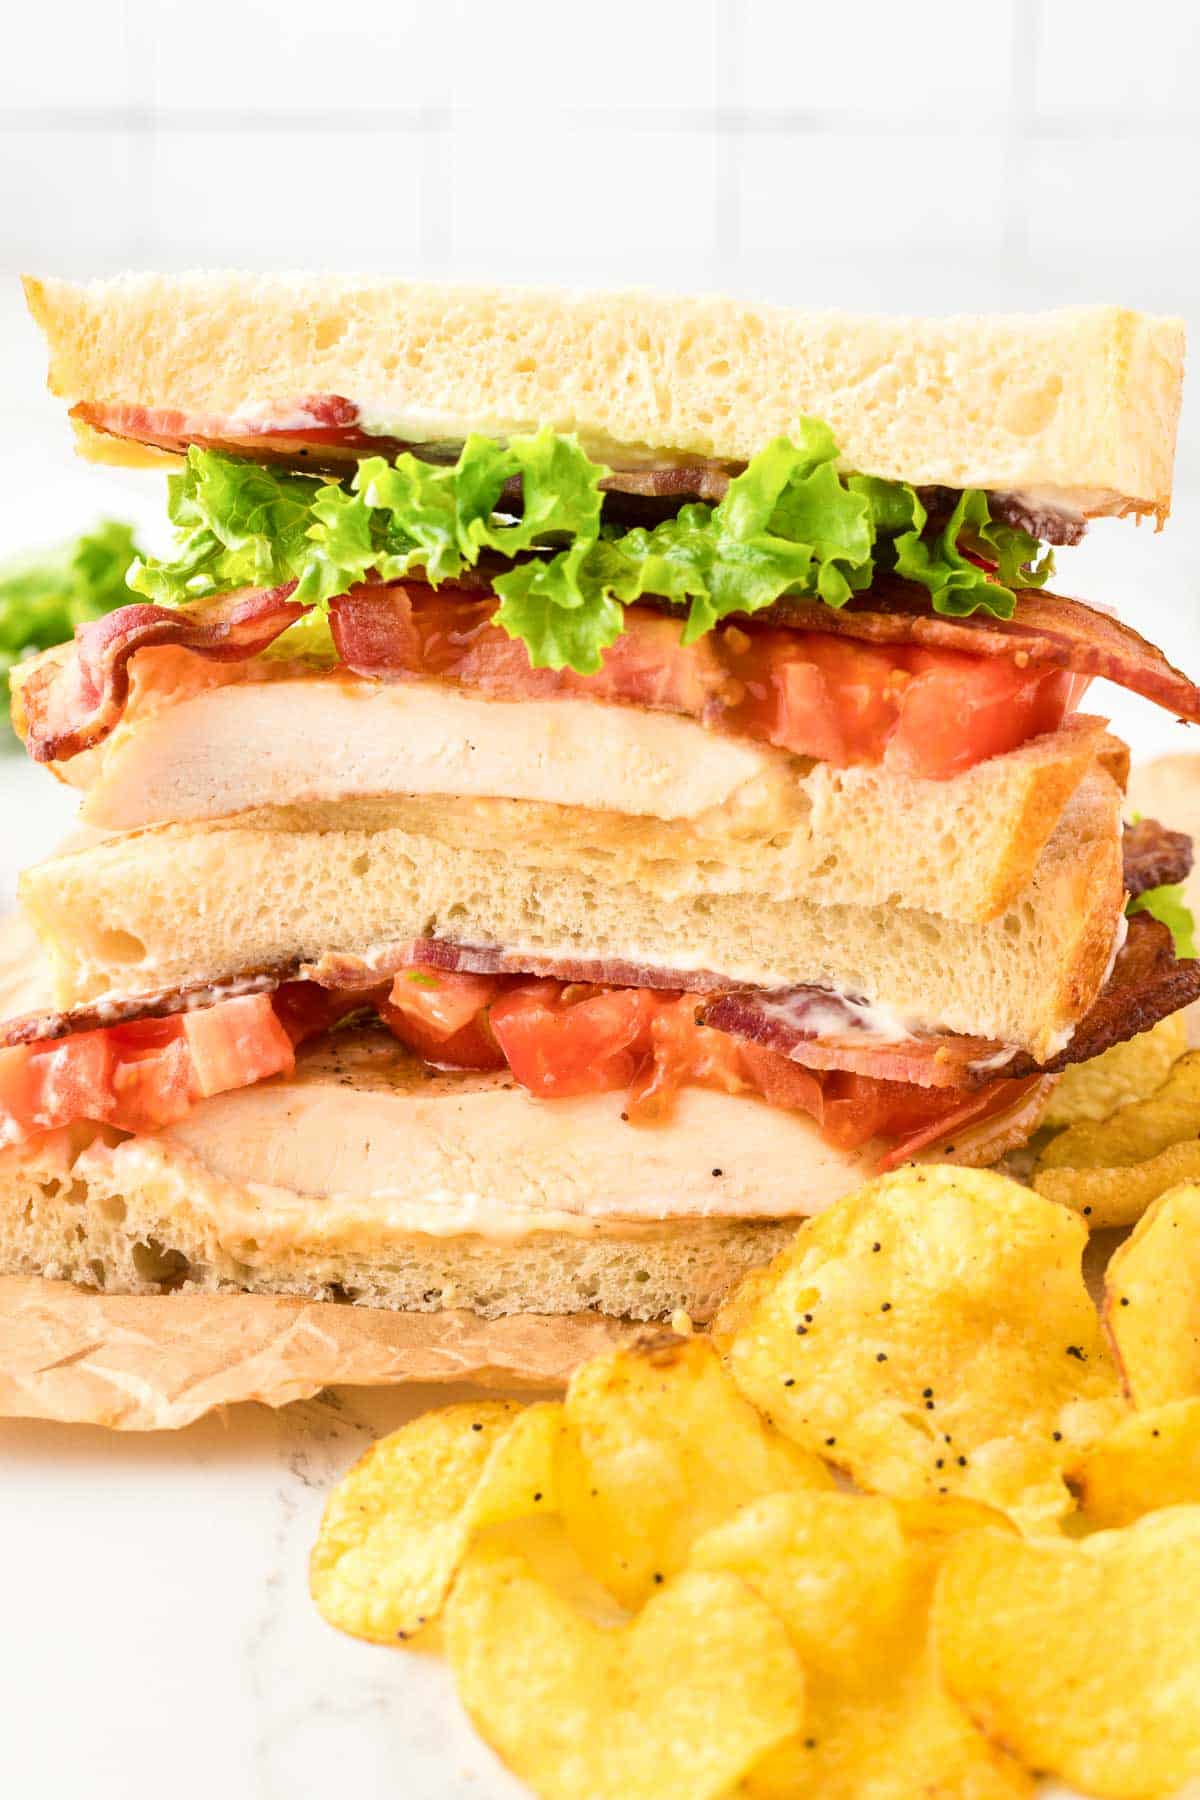 A sandwich with bacon, lettuce, tomatoes, chicken next to potato chips.